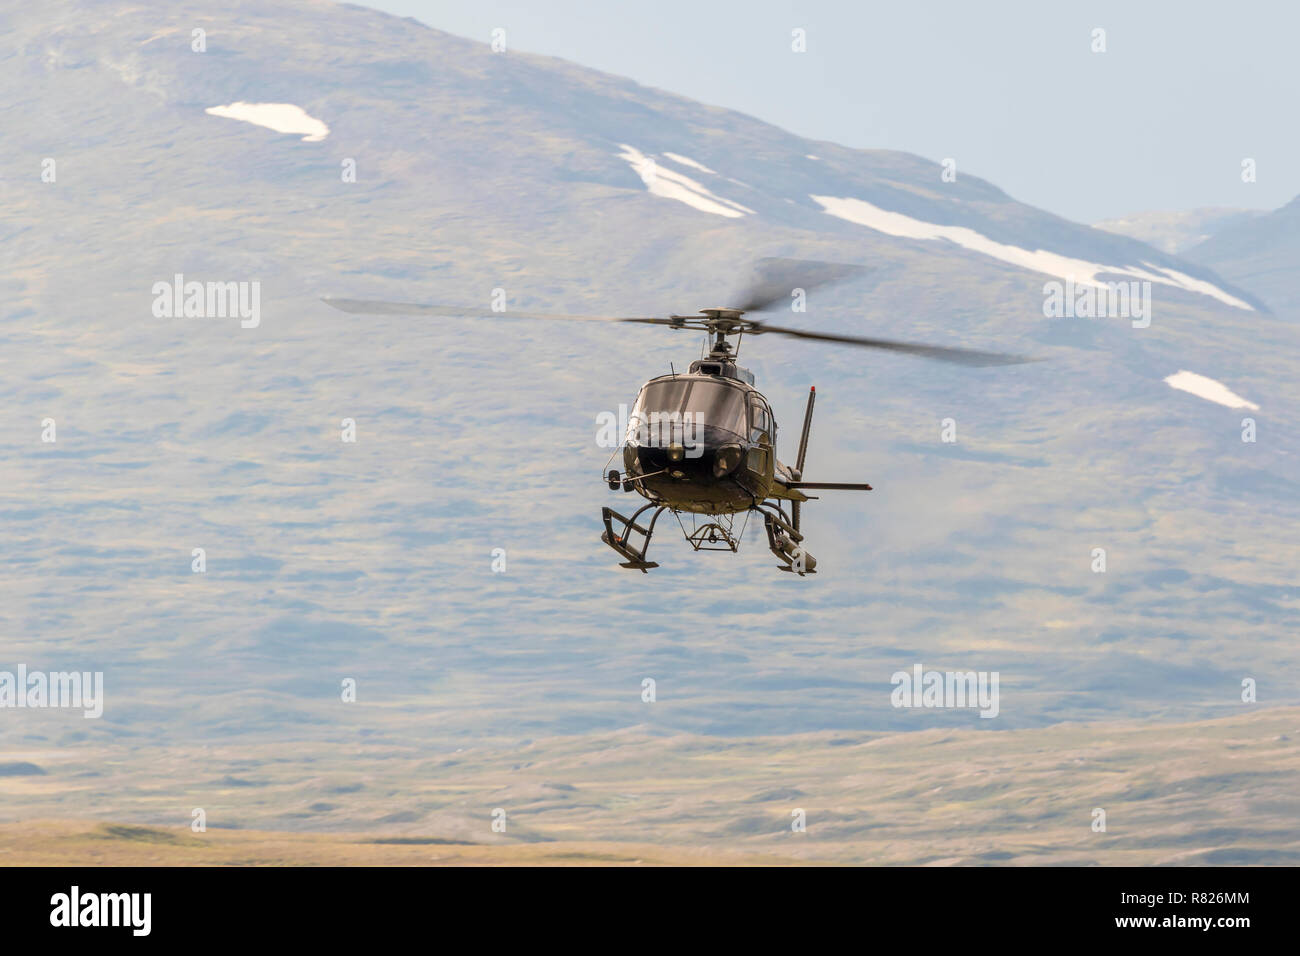 Helicopter flying in a mountain landscape in the wilderness Stock Photo